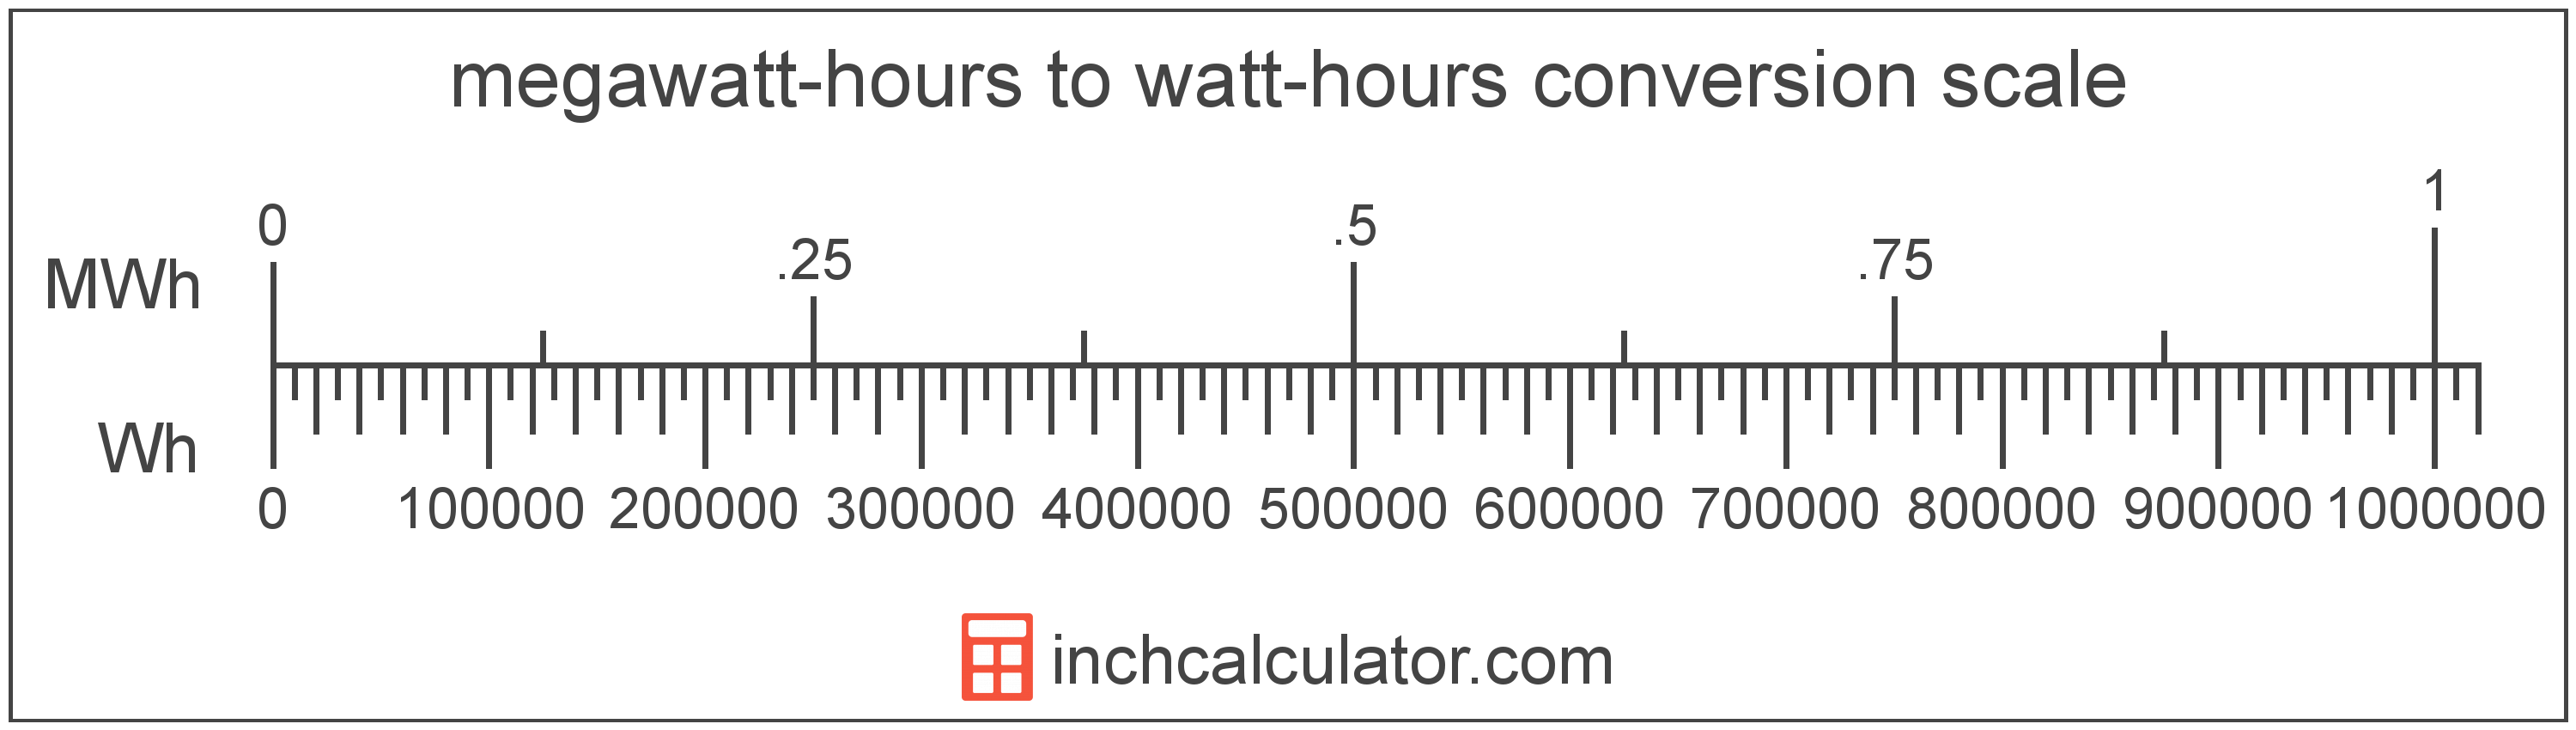 conversion scale showing megawatt-hours and equivalent watt-hours energy values